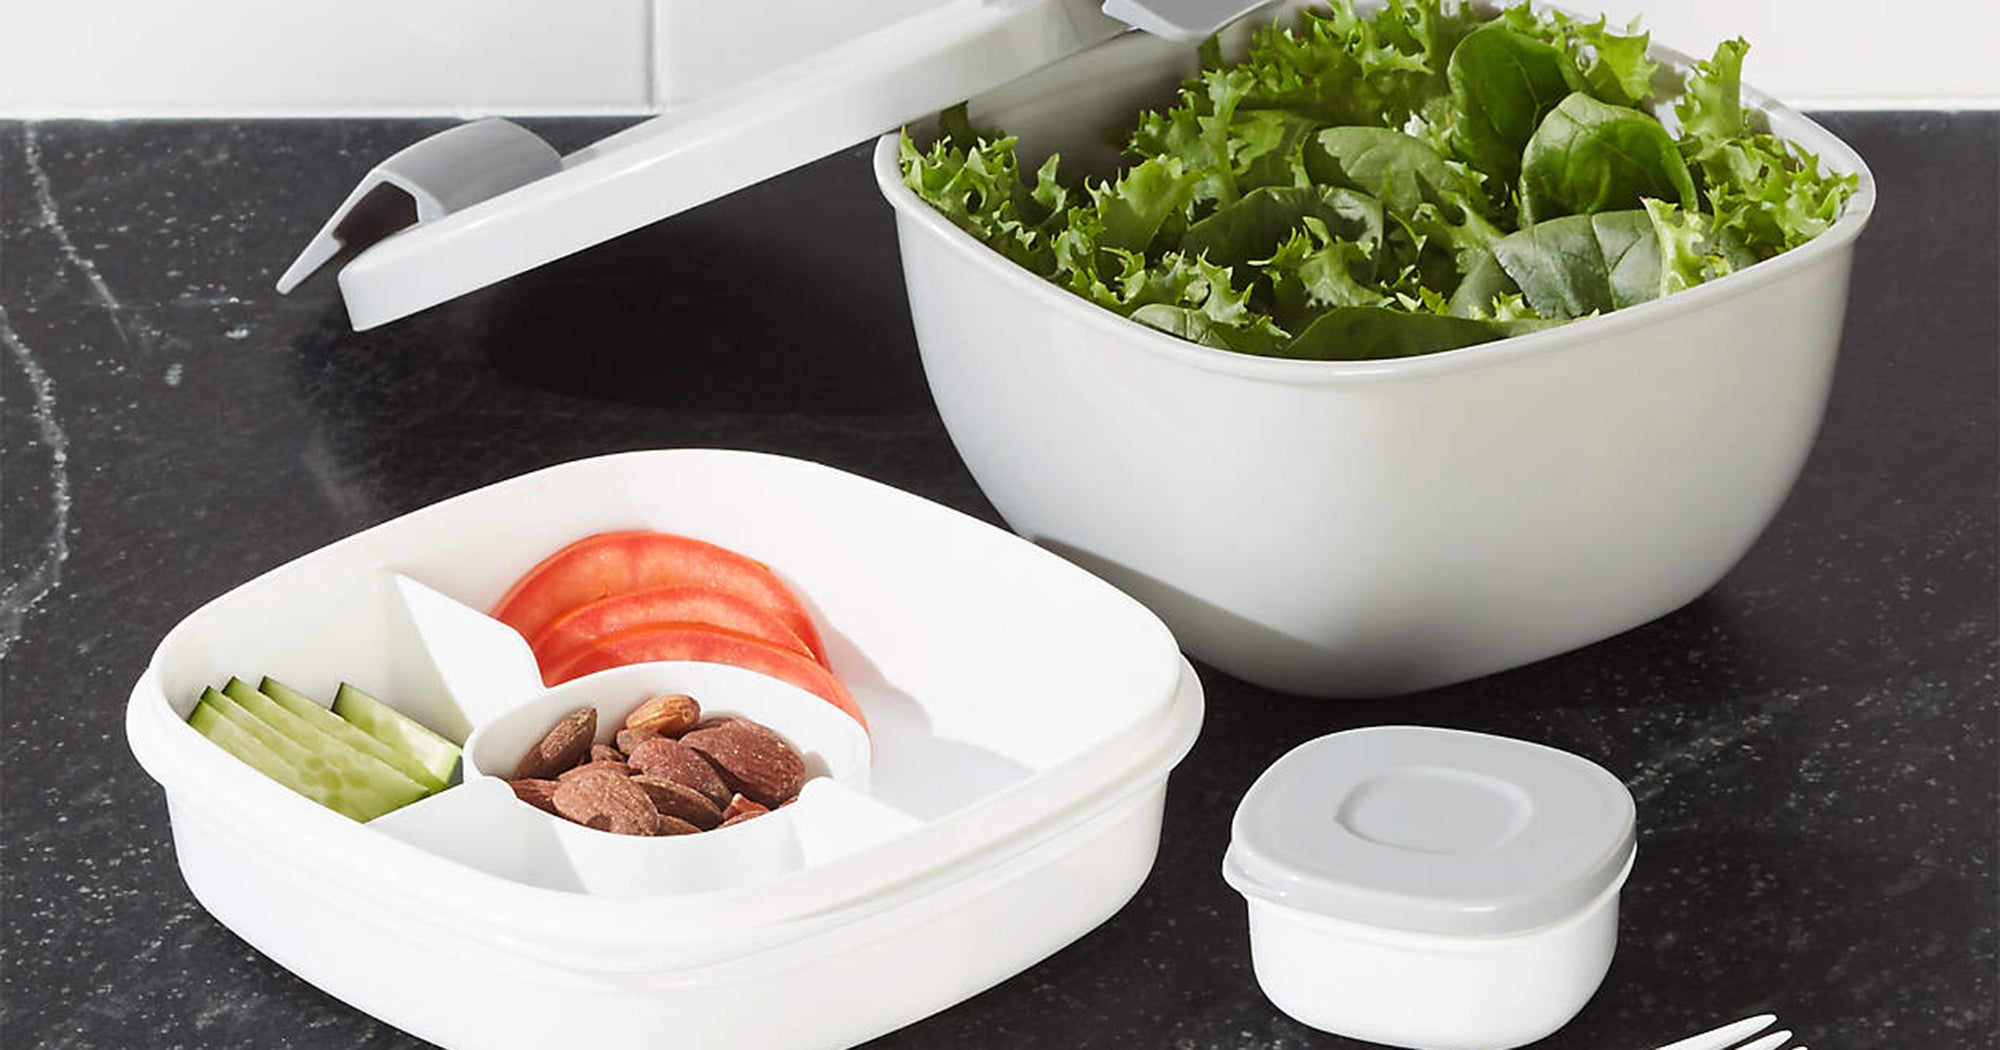 Portable Salad Dressing Containers That Will Save Your Lunch